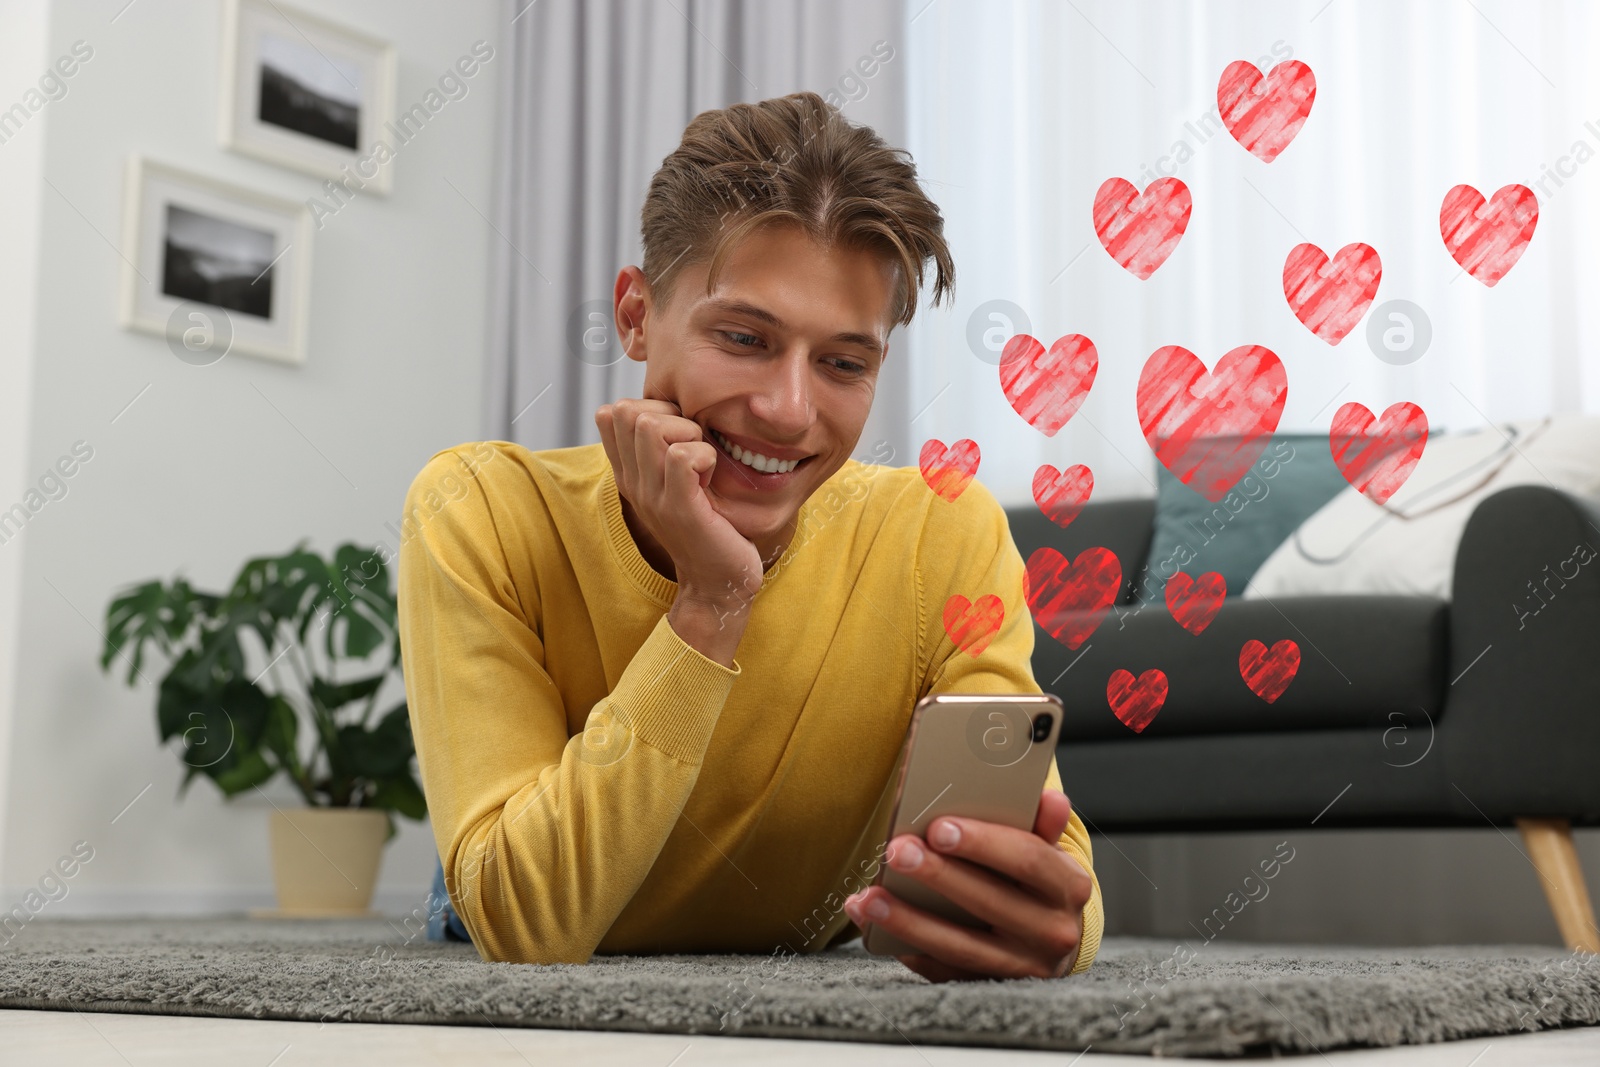 Image of Long distance relationship. Young man talking to his loved one via video chat indoors. Red hearts near him